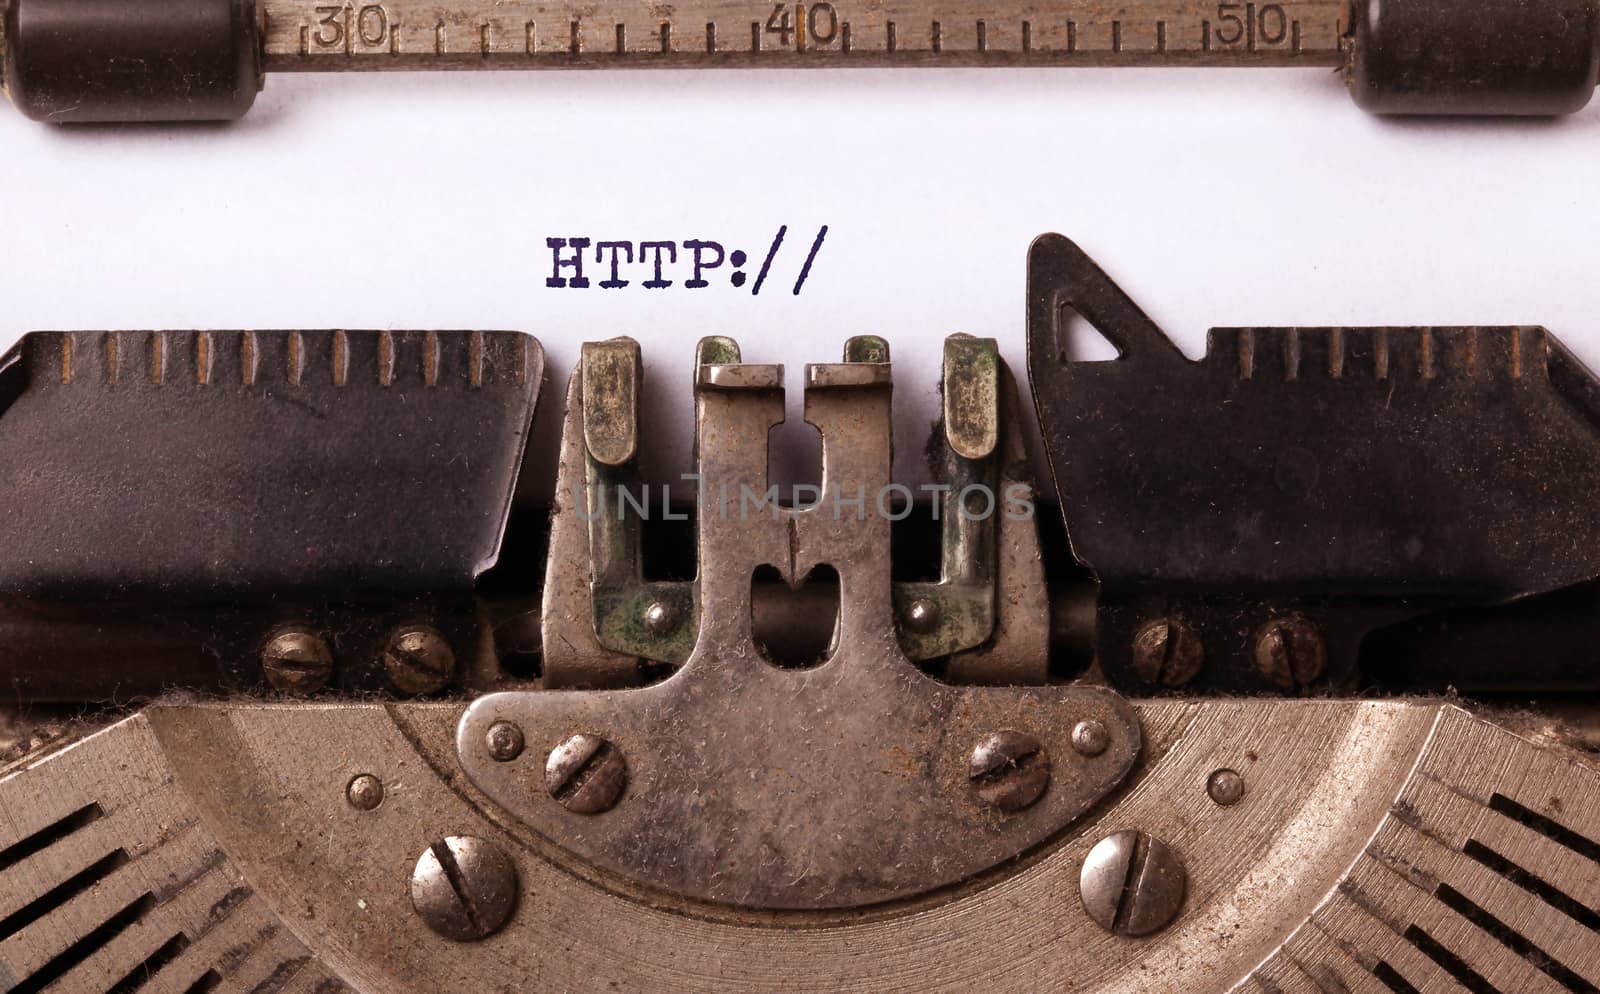 Vintage inscription made by old typewriter, http